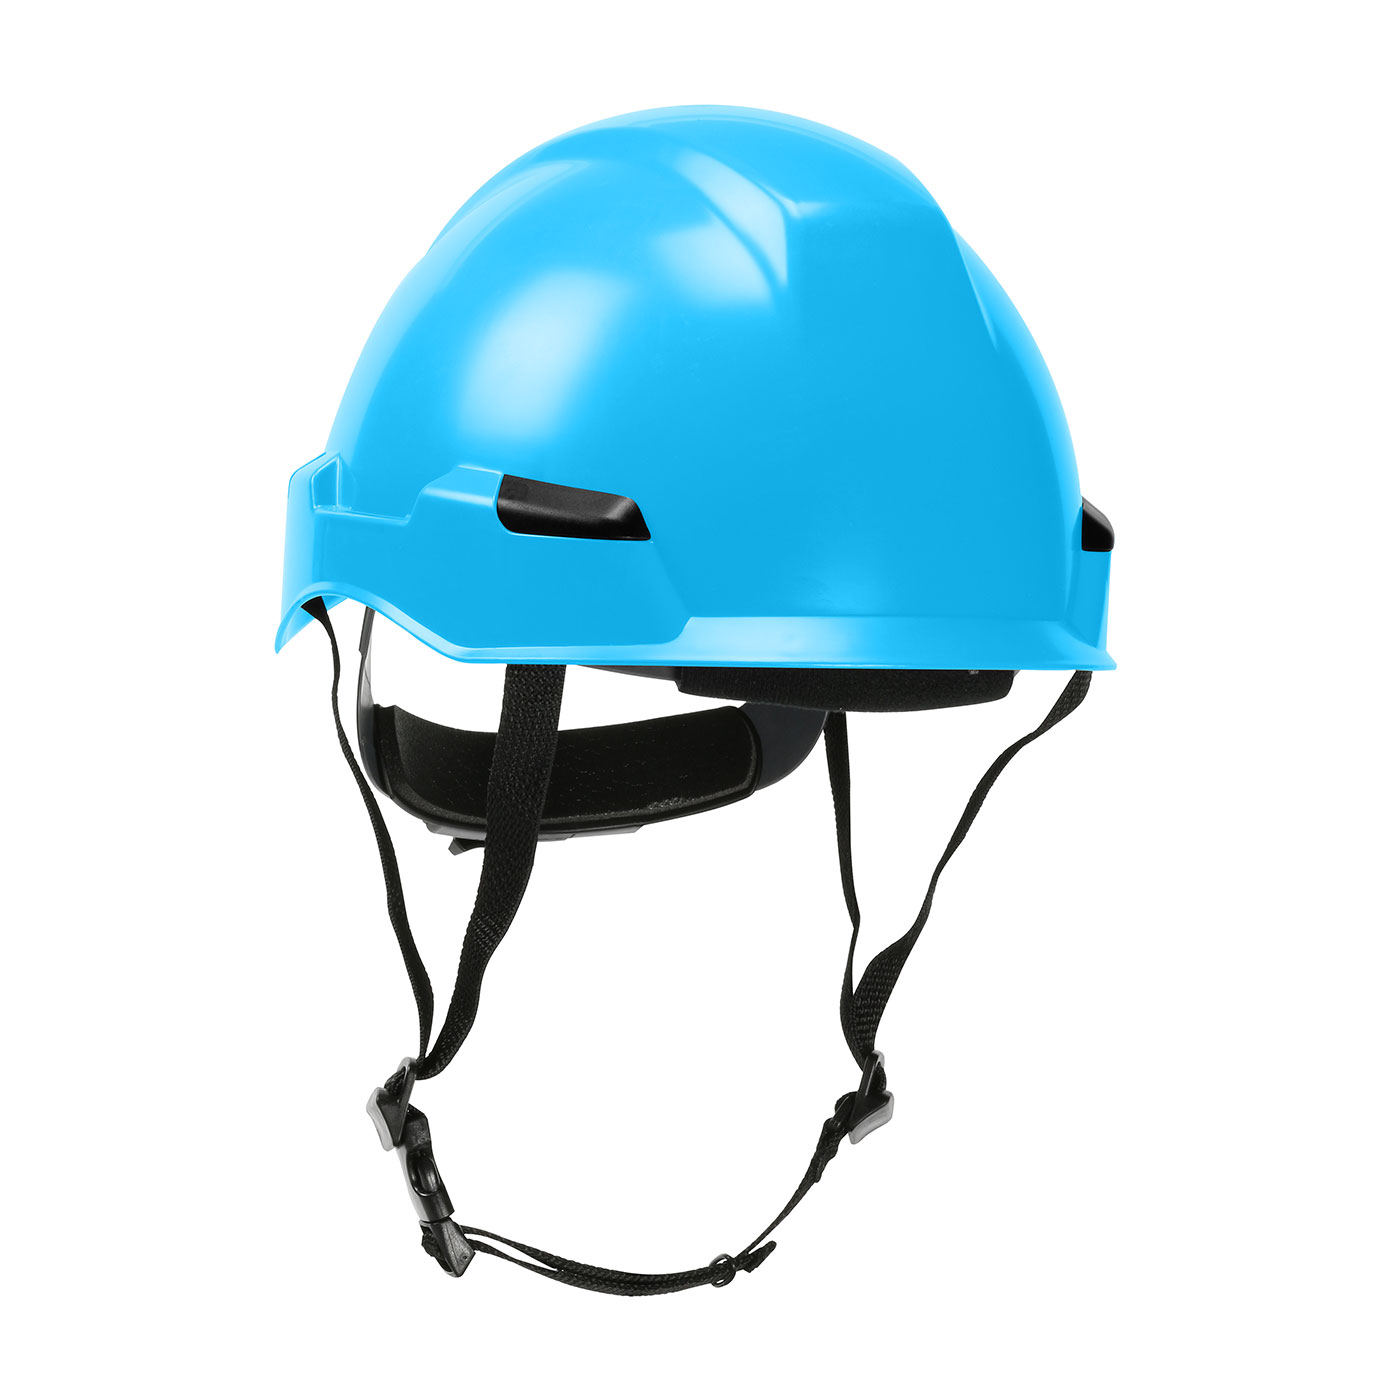 280-HP142R PIP® Dynamic Rocky™ Industrial Climbing Helmet with Polycarbonate / ABS Shell, Hi-Density Foam Impact Liner, Nylon Suspension, Wheel Ratchet Adjustment and 4-Point Chin Strap-Lt  Blue